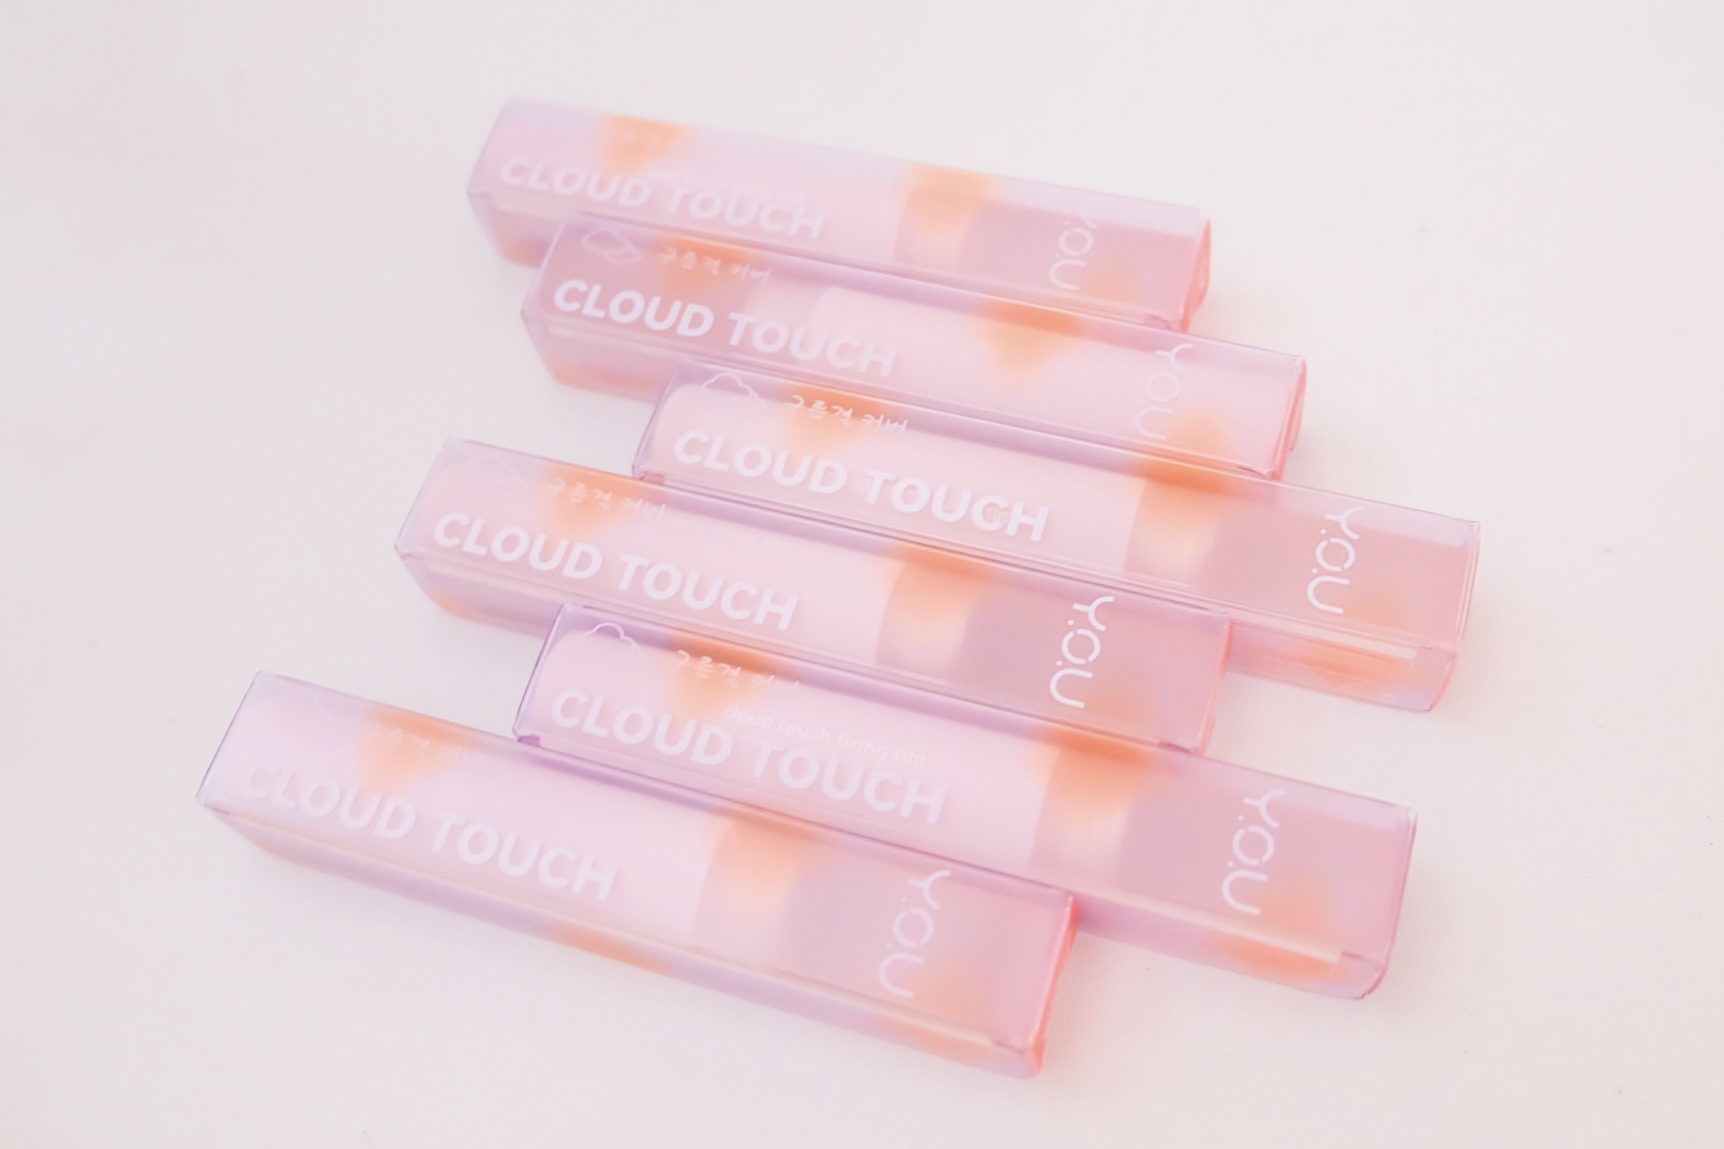 [Review] Y.O.U Cloud Touch Fixing Tint